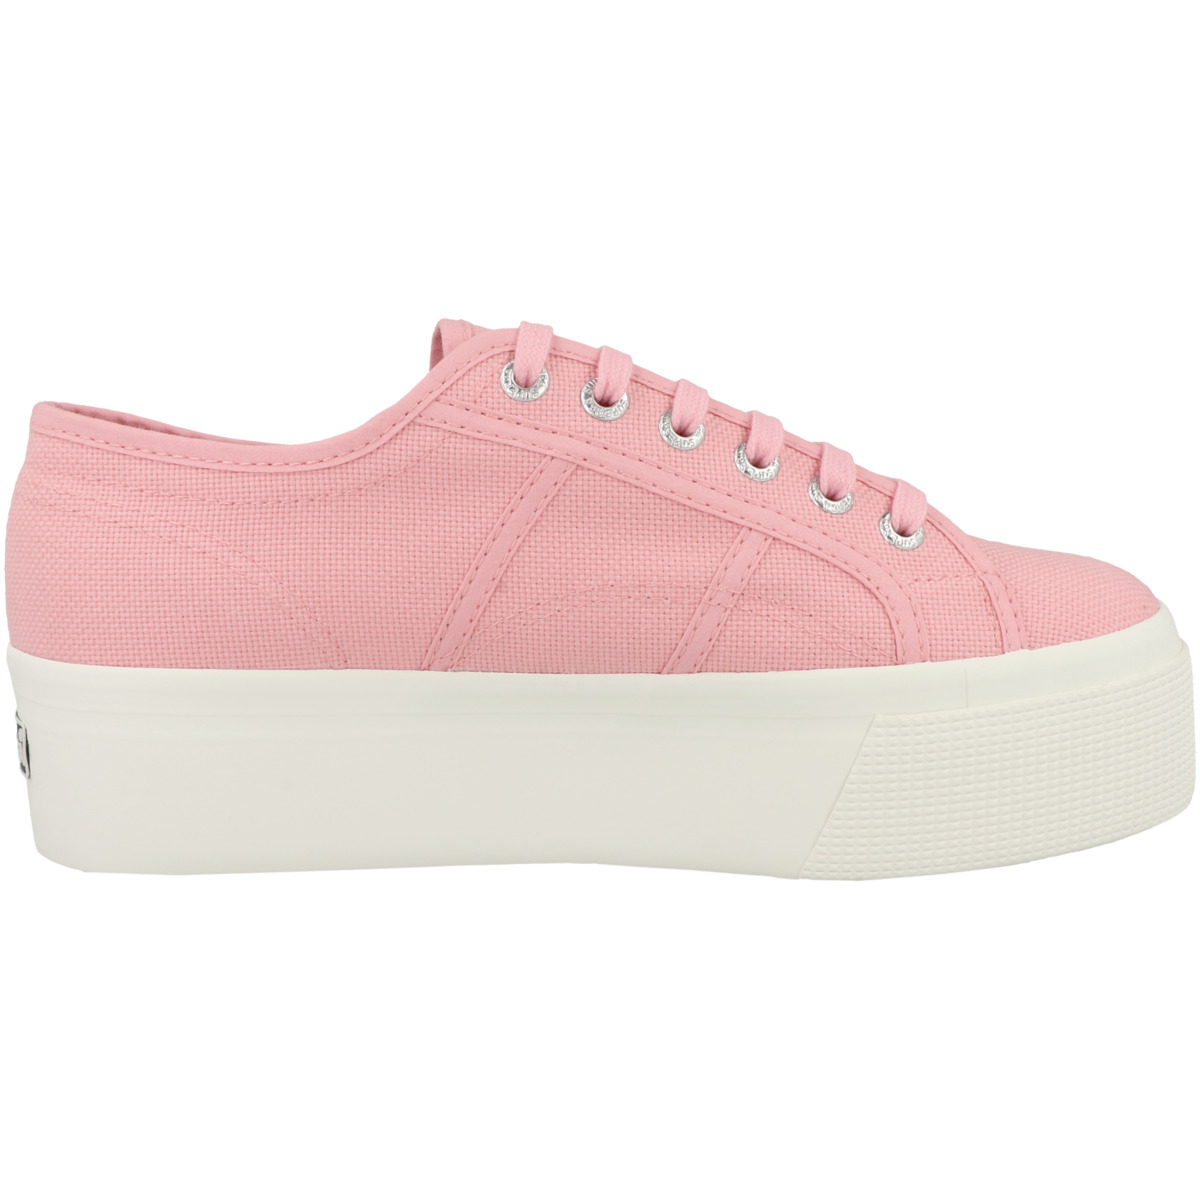 Superga 2790 Cotw Linea up an down Sneaker pink